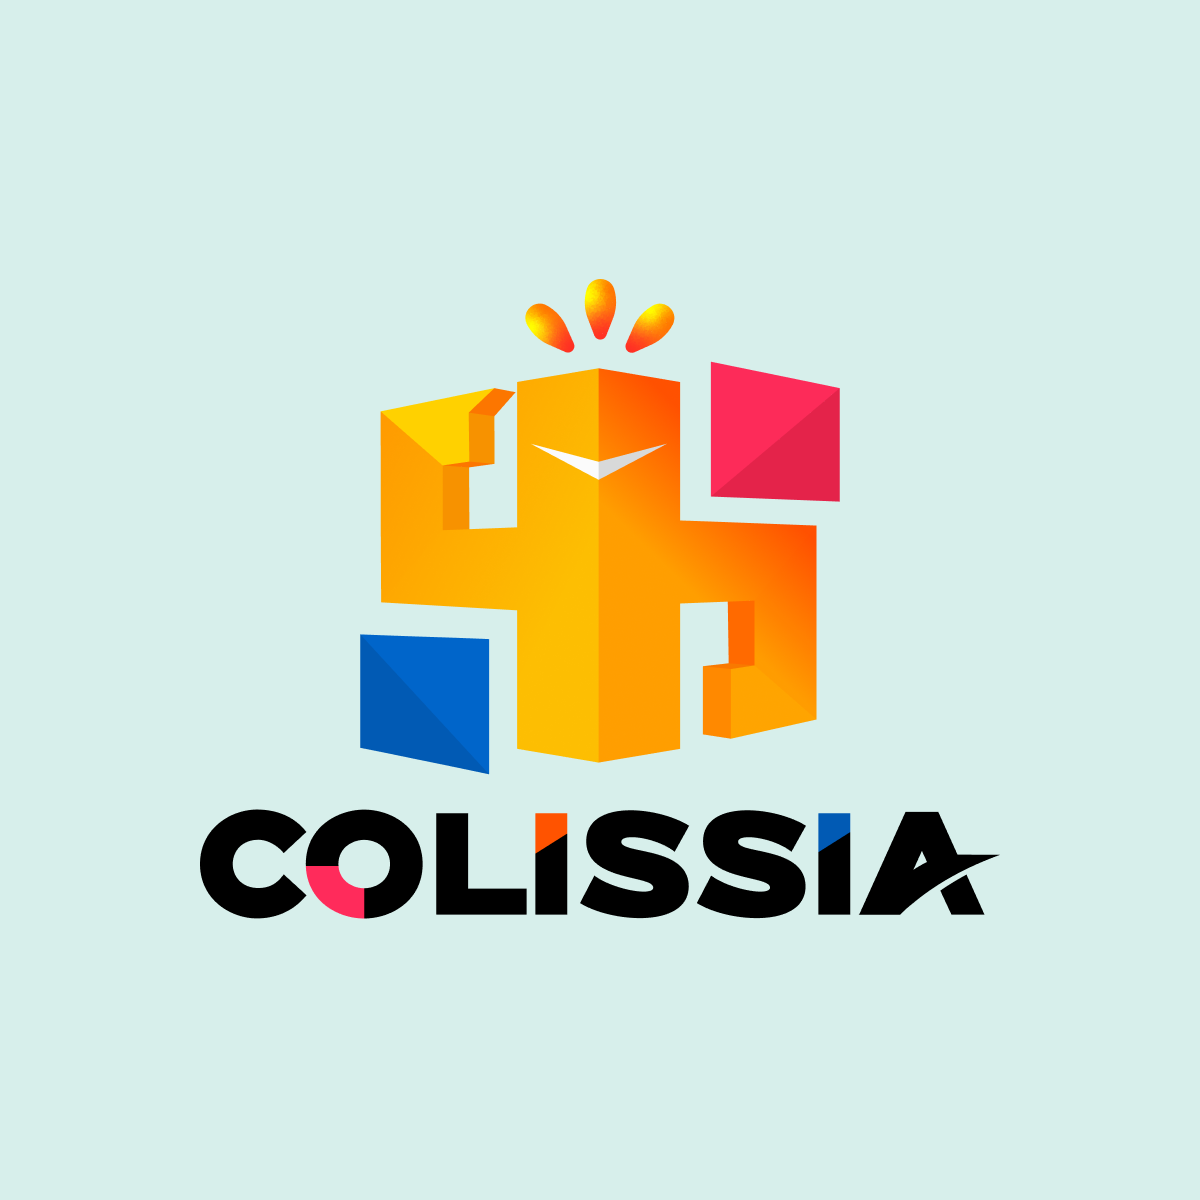 Colissia developed by ANW